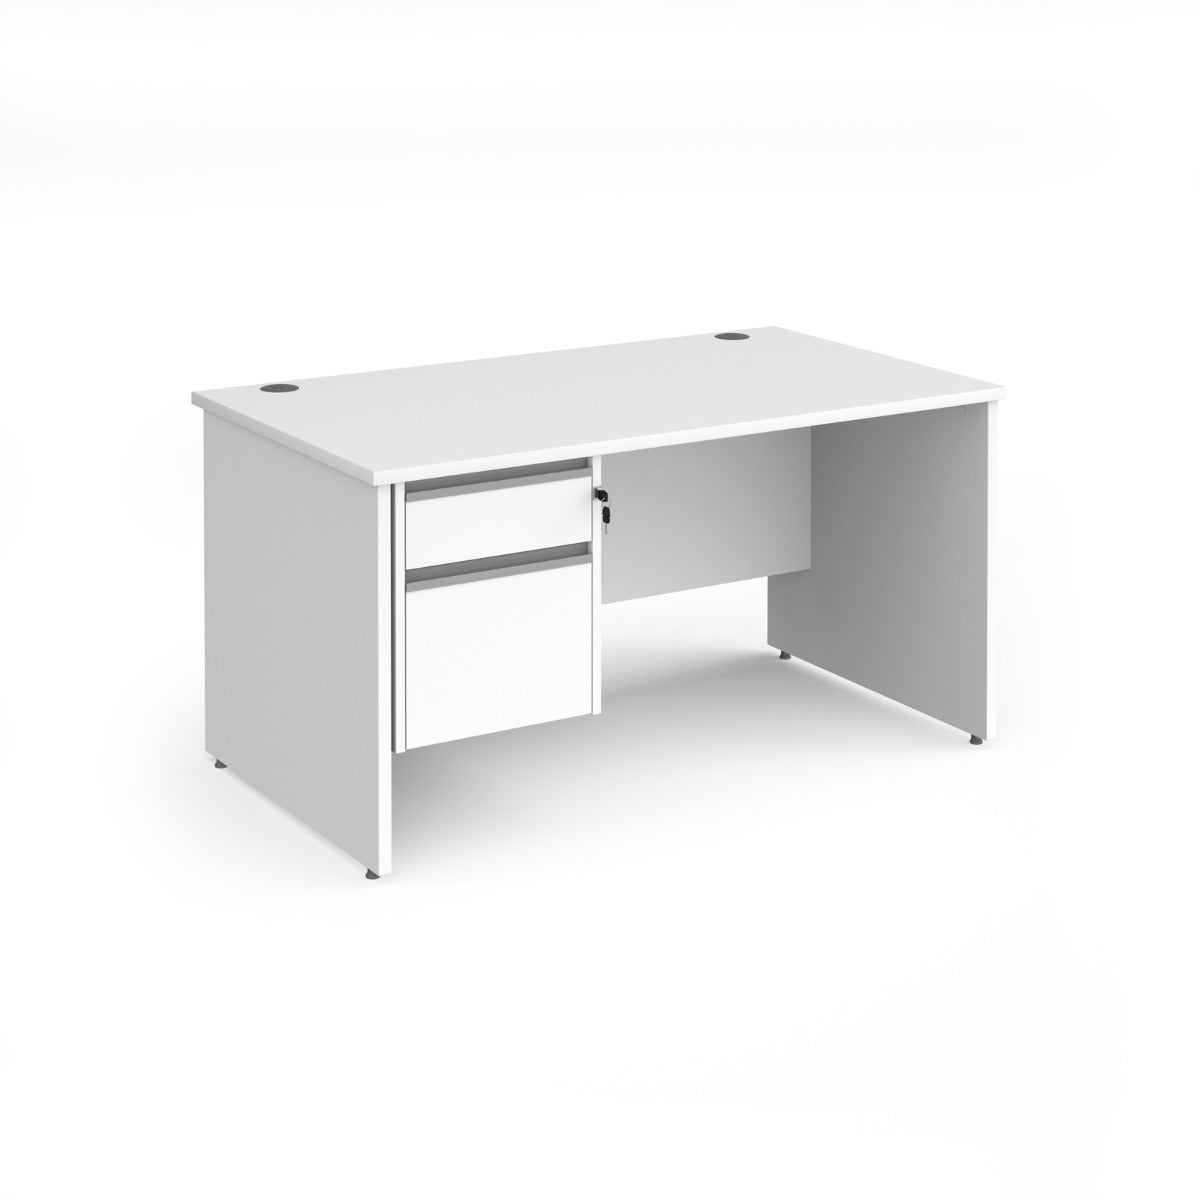 Contract Panel Leg Straight Office Desk with Two Drawer Storage